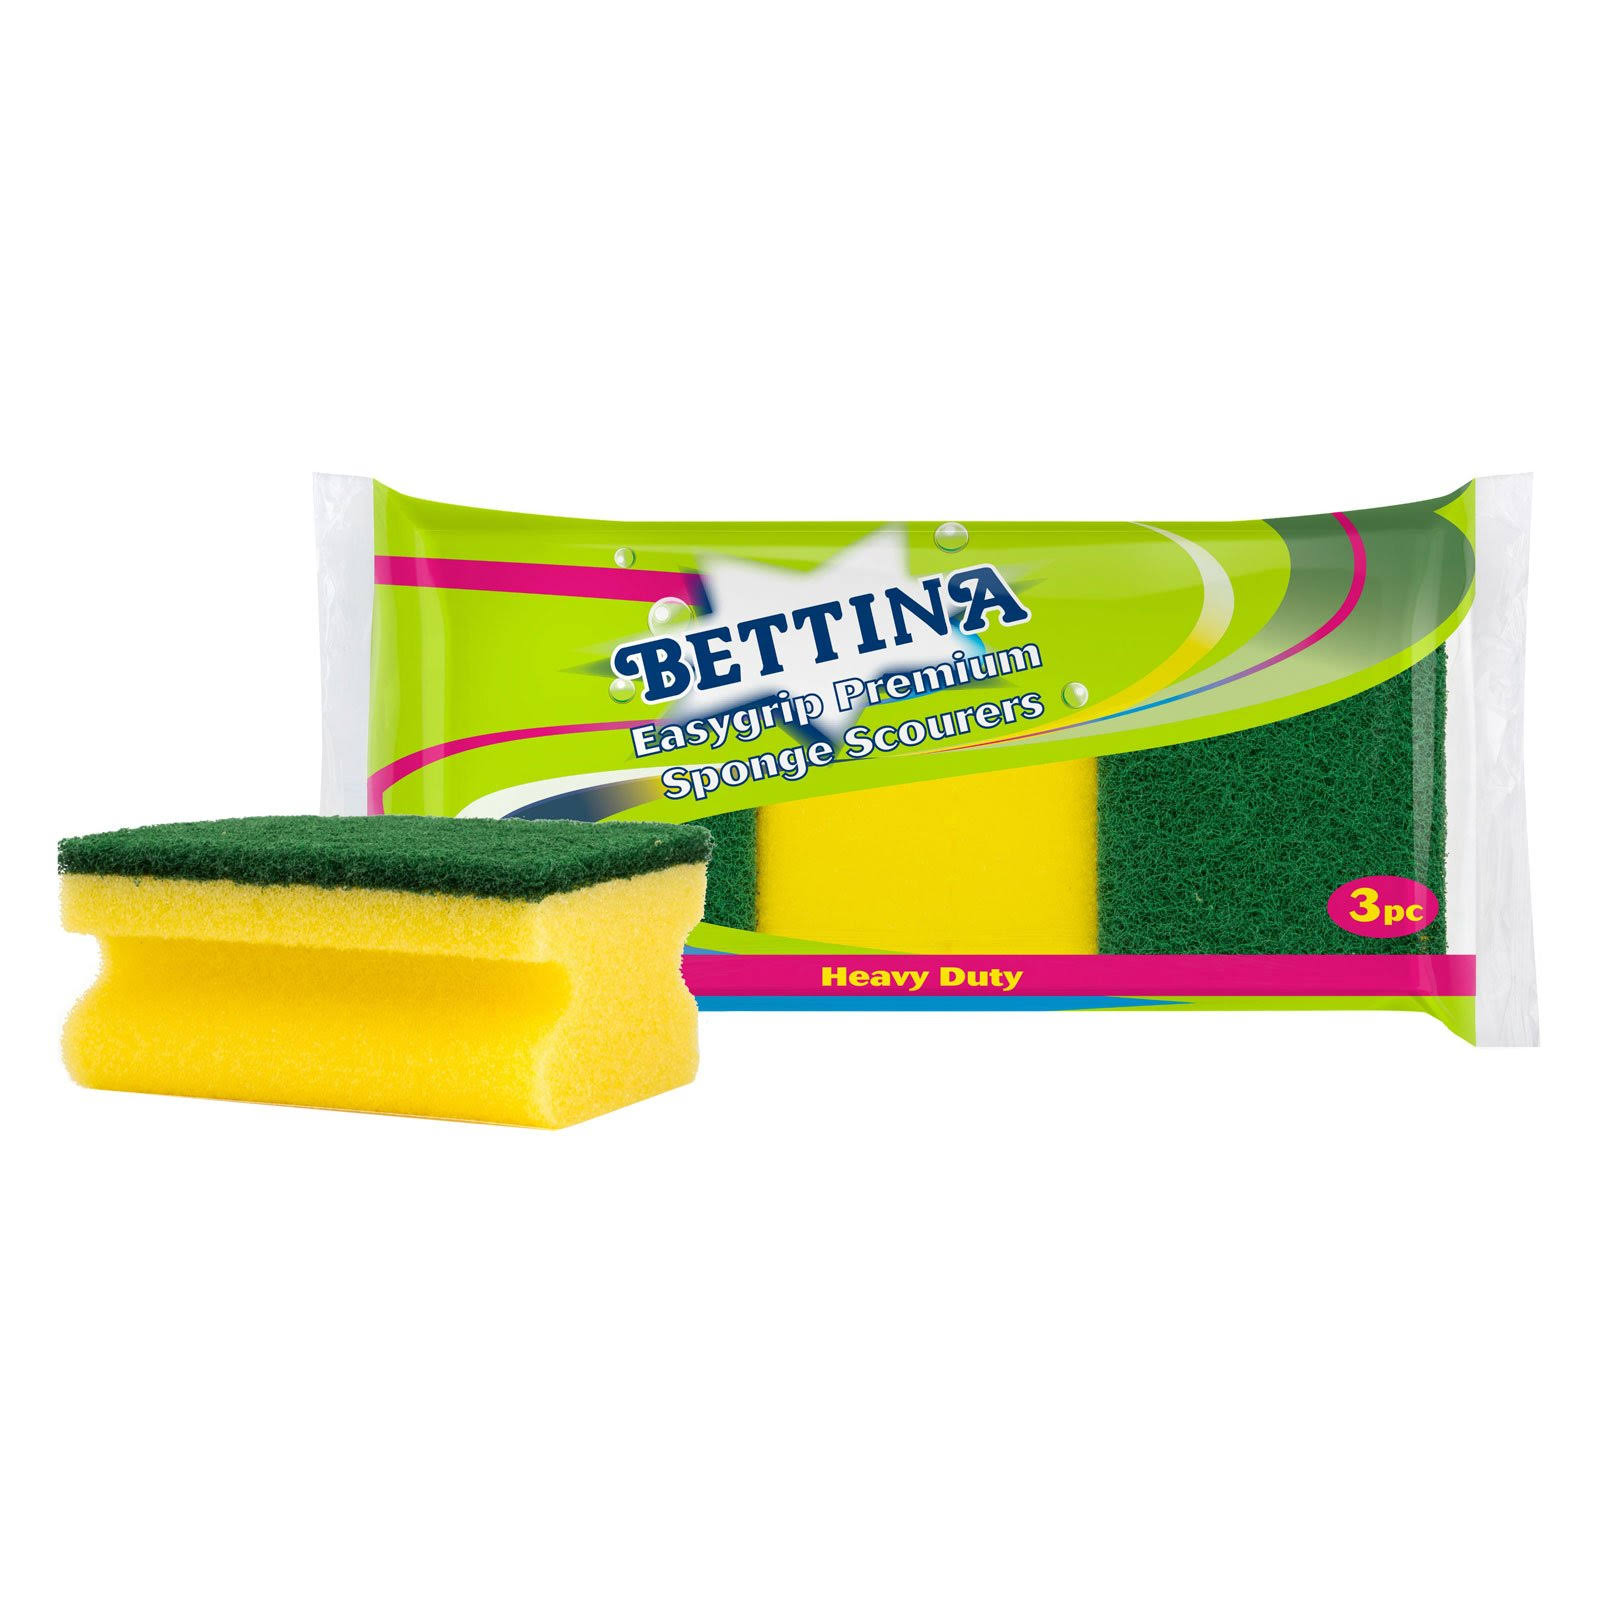 Bettina 2 PC Extra Thick Cellulose Sponges